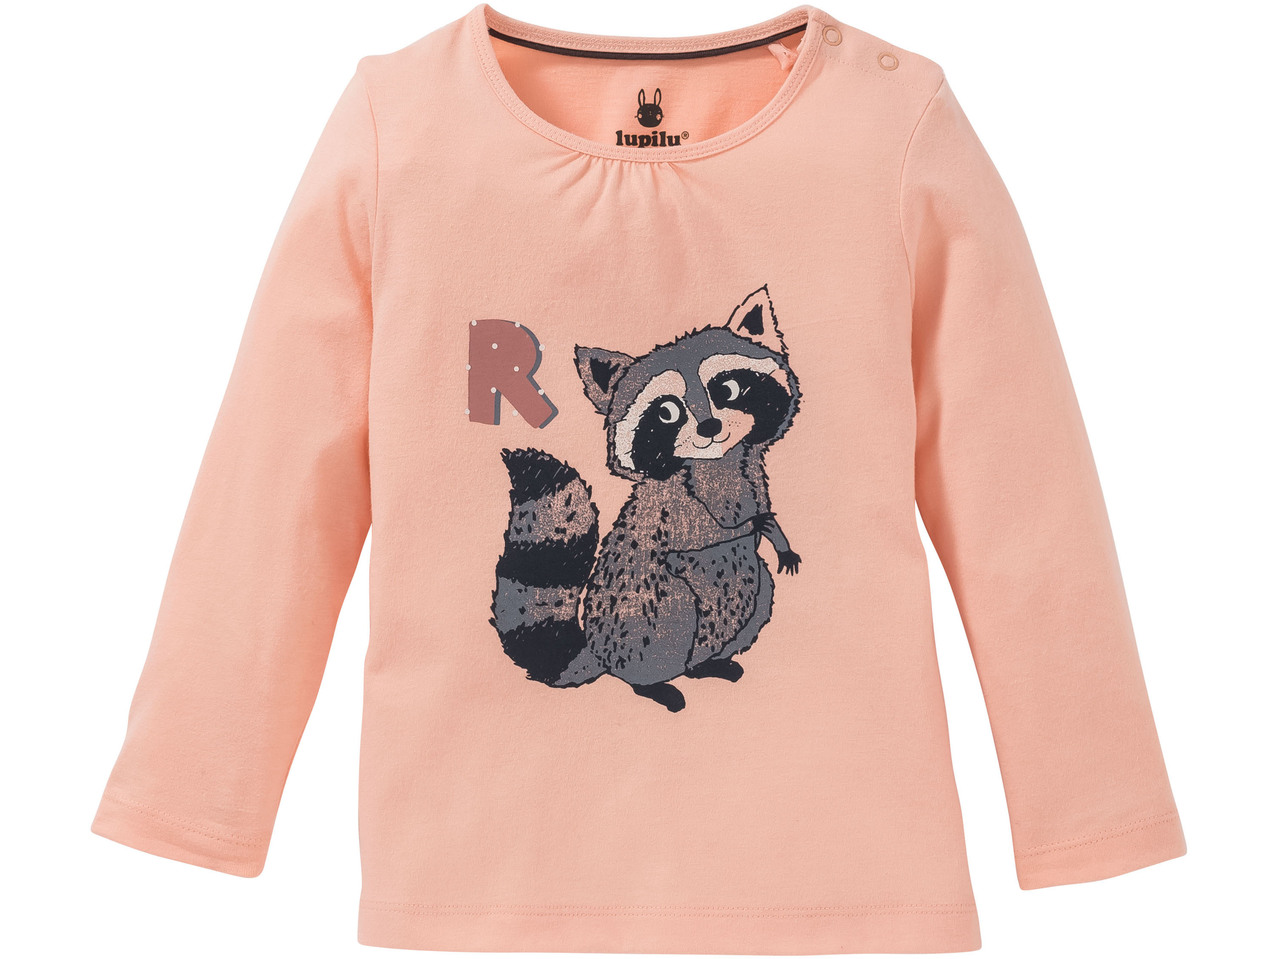 Girls' Long Sleeve Tops, 2 pieces